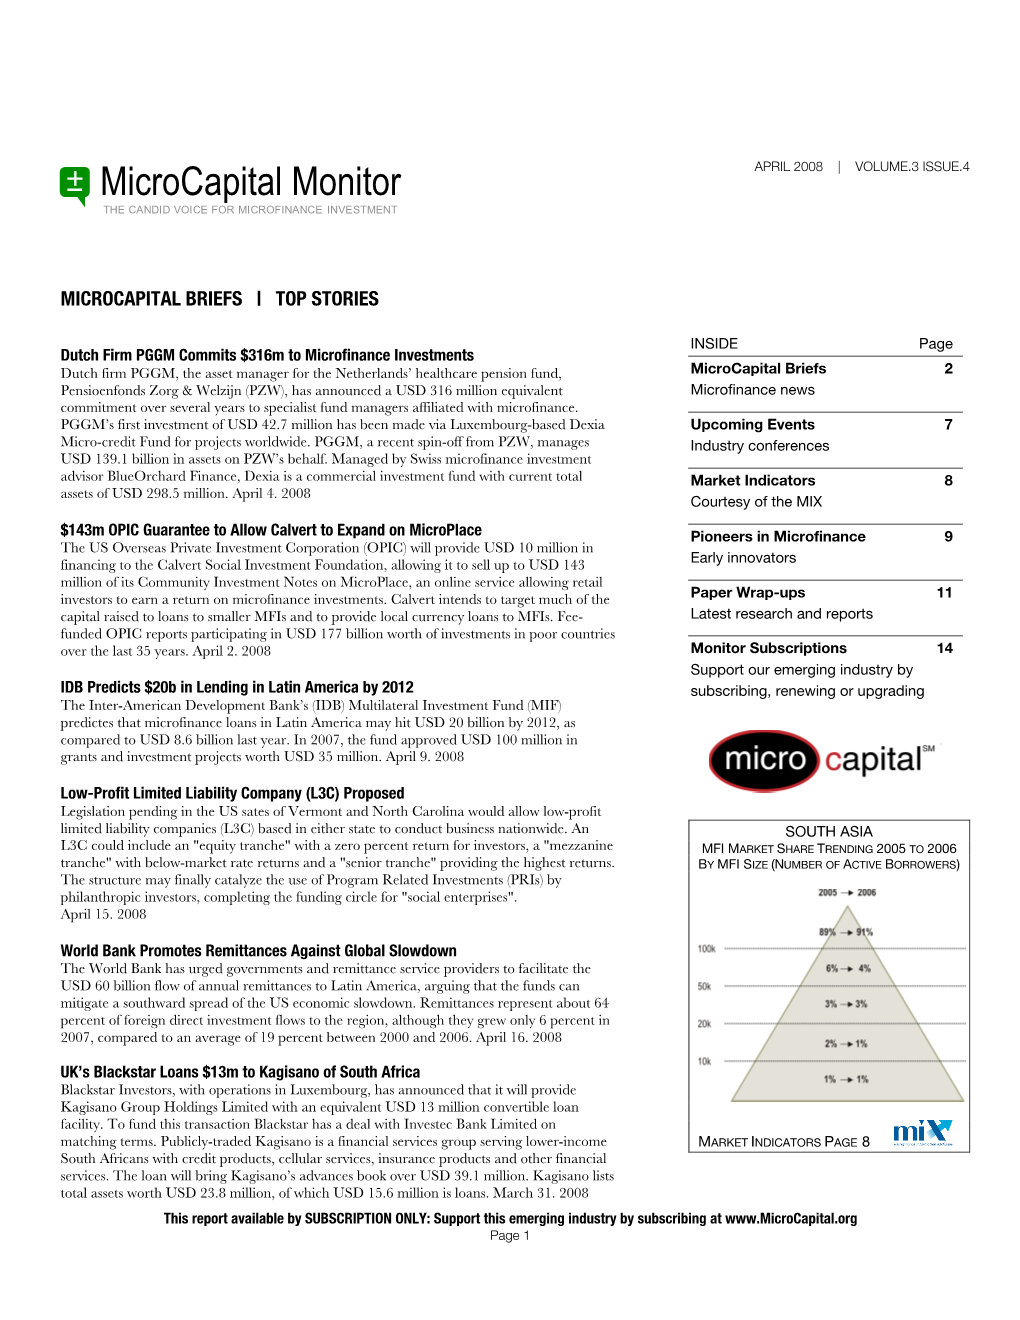 Microcapital Monitor APRIL 2008 | VOLUME.3 ISSUE.4 the CANDID VOICE for MICROFINANCE INVESTMENT